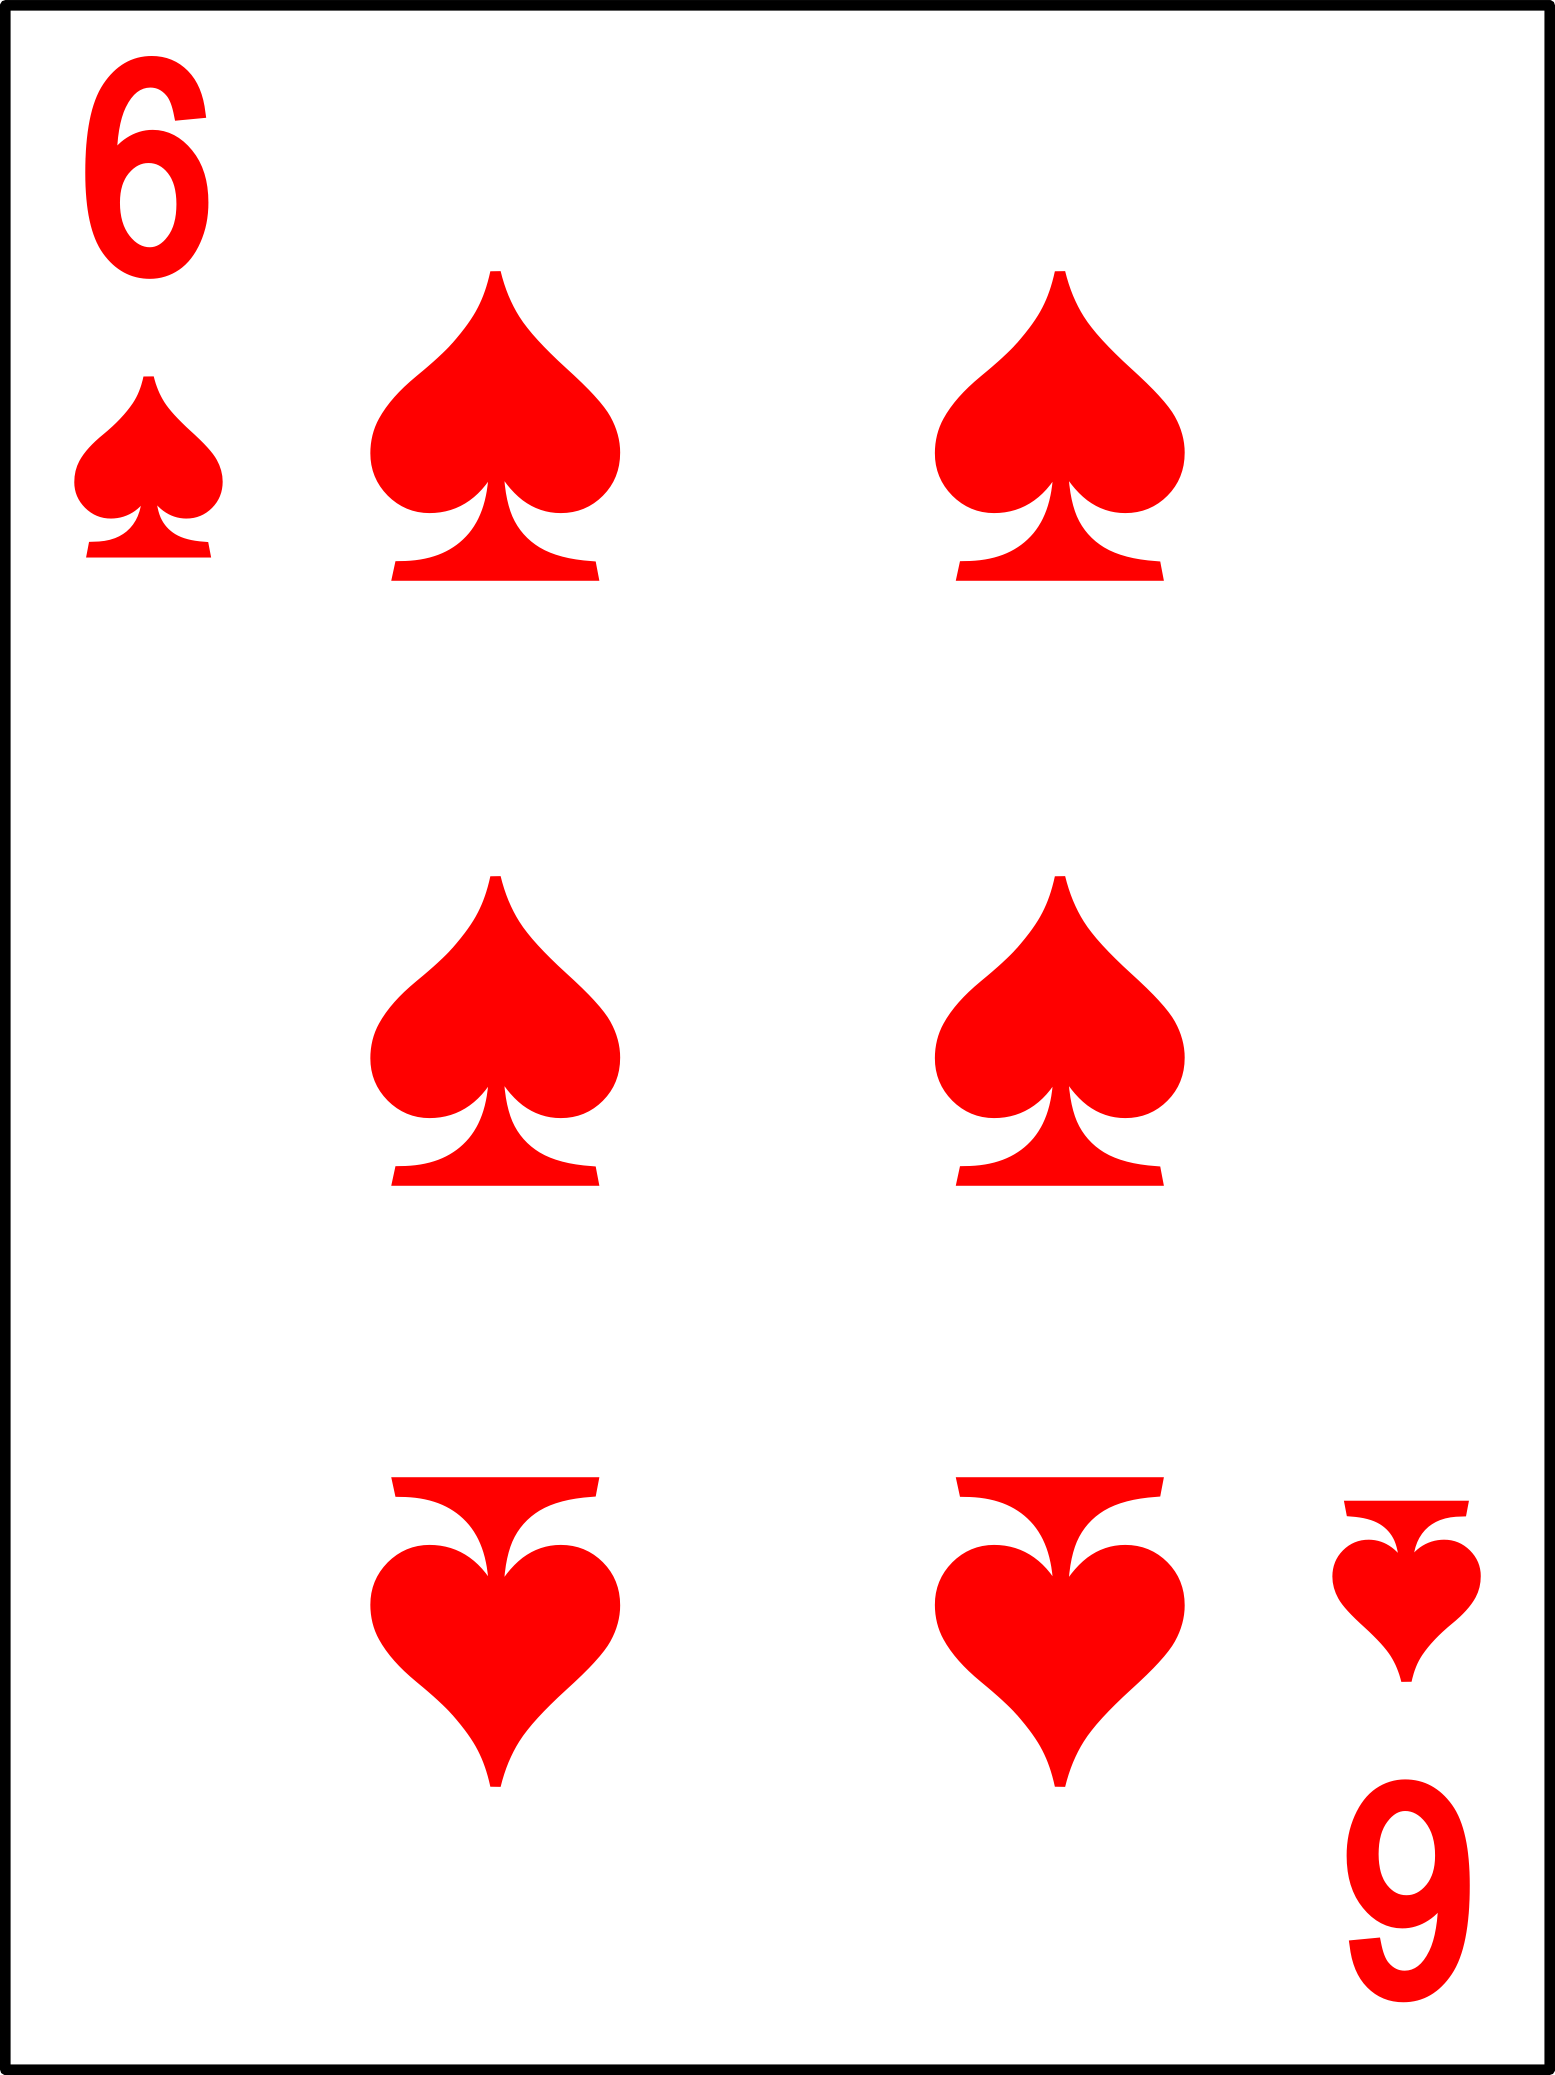 [The 6 Spades playing card but red instead of the normal black]